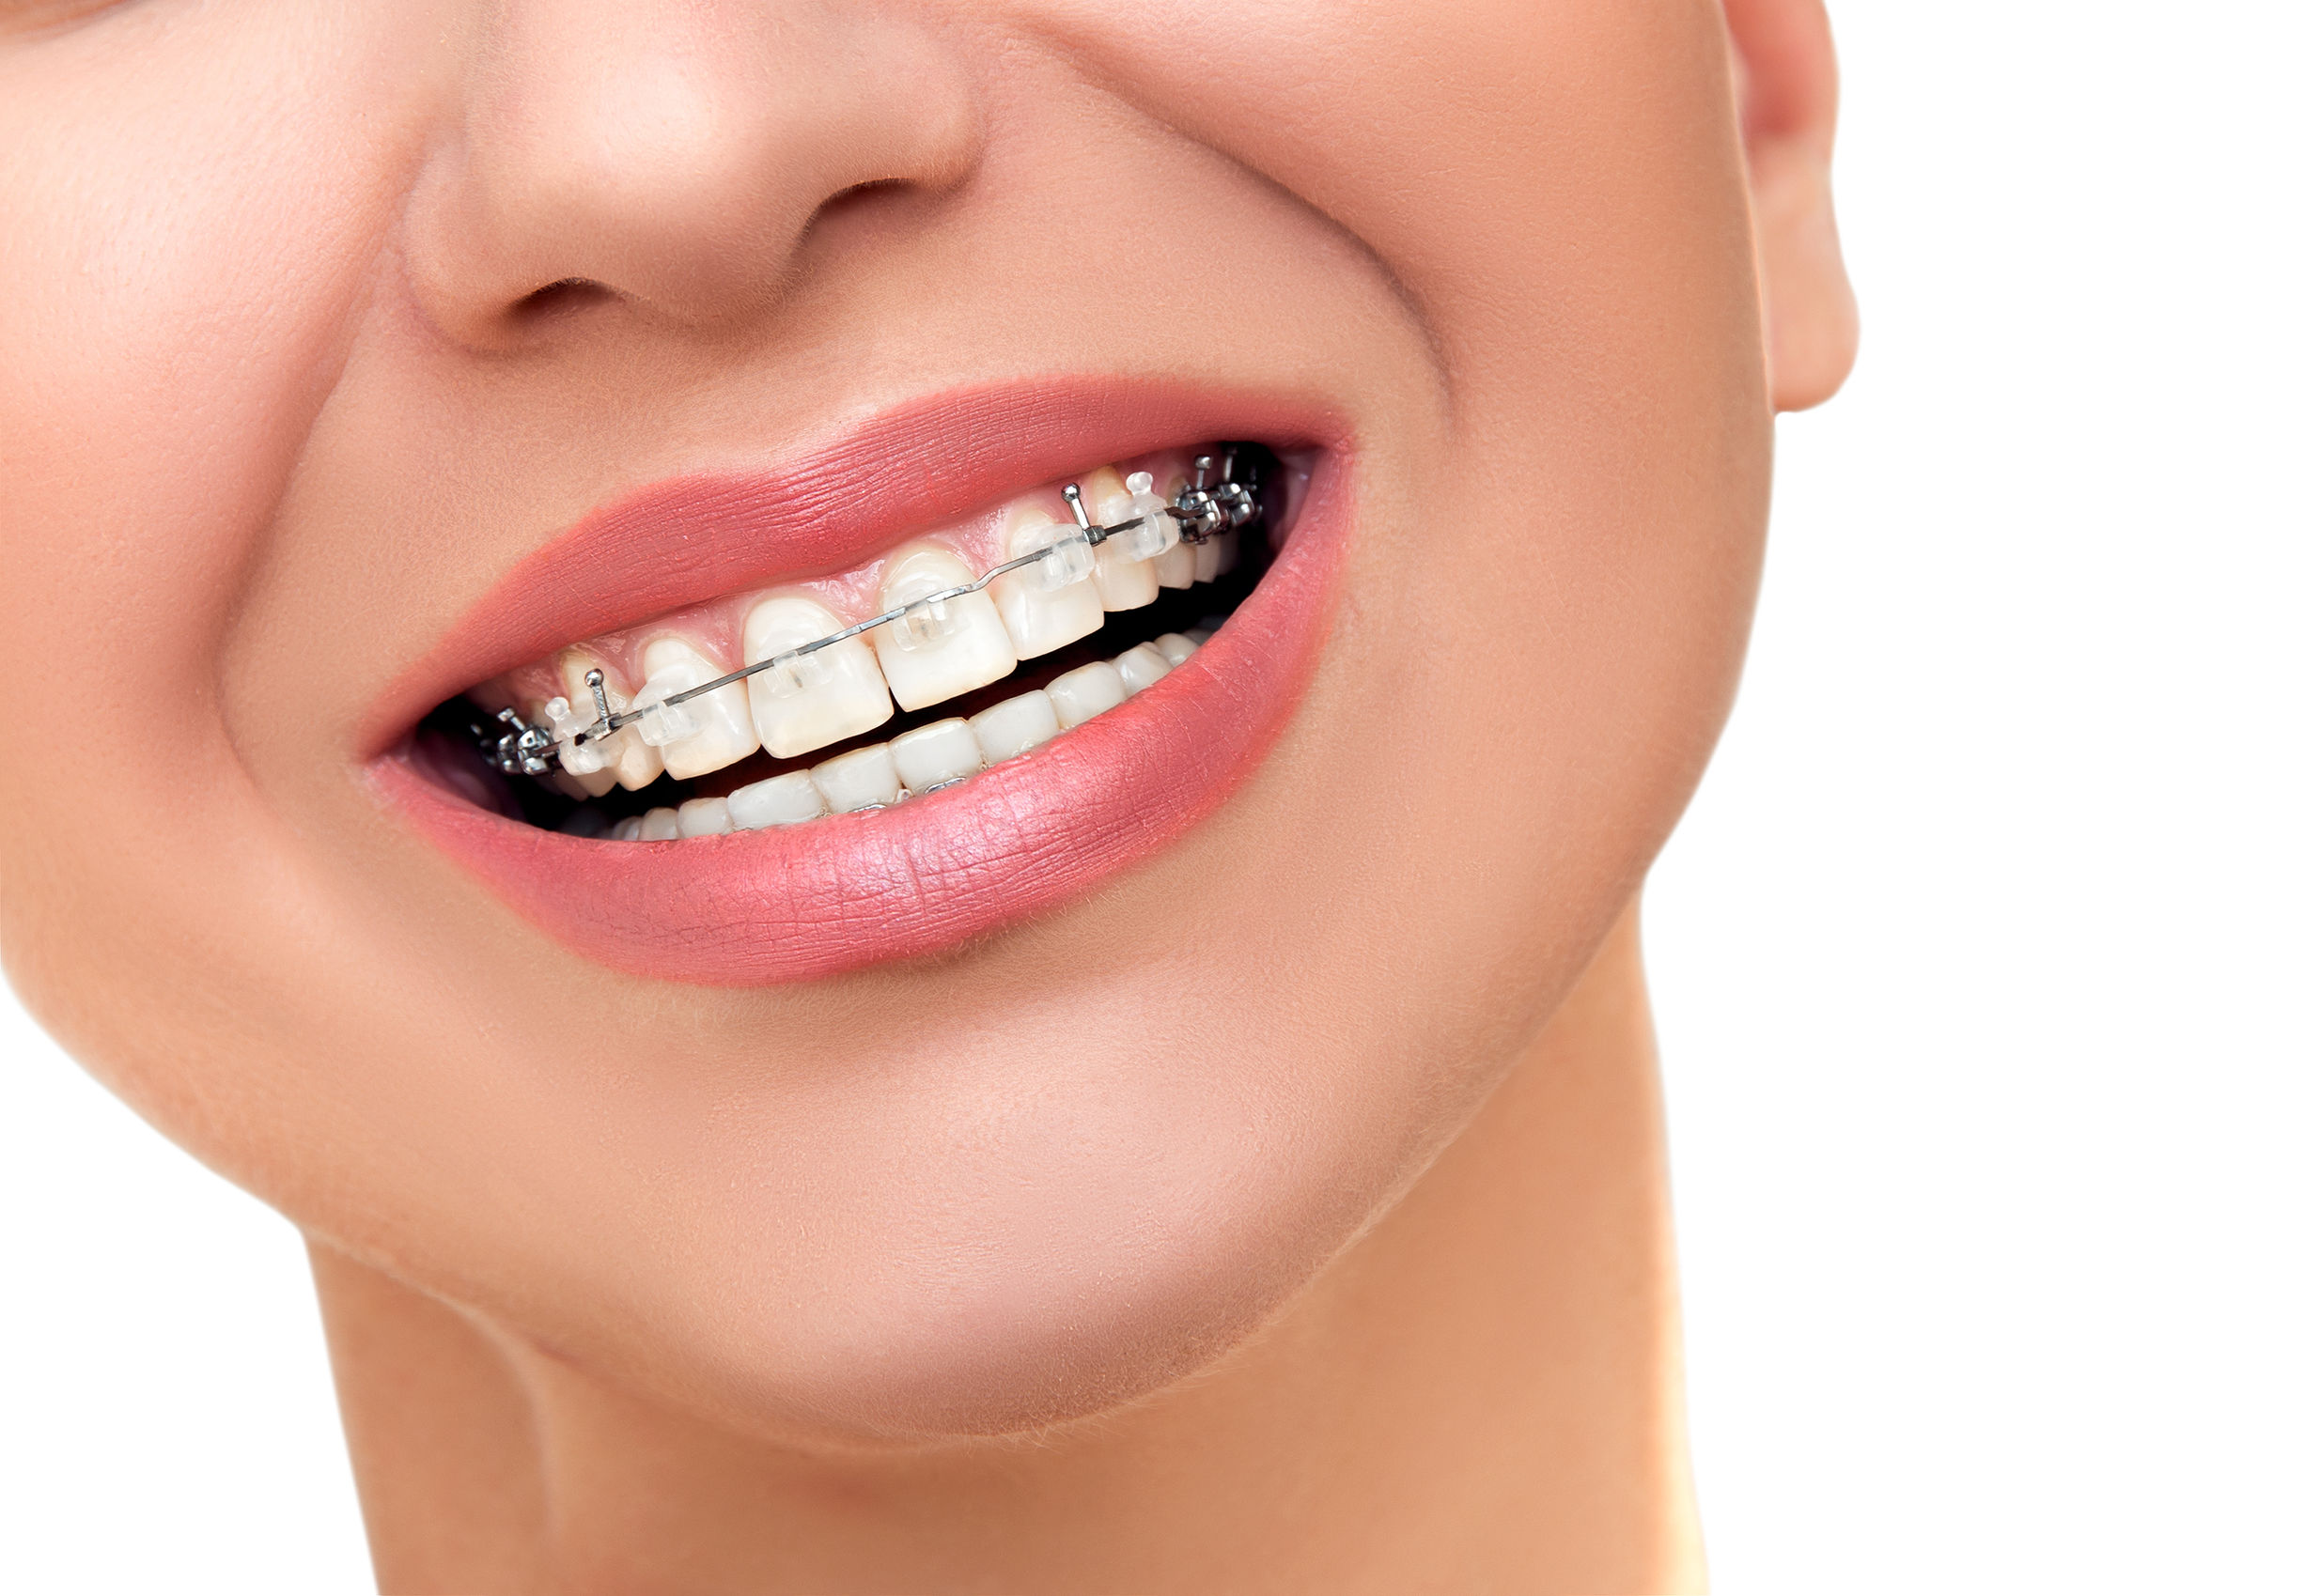 Closeup Beautiful Female Smile with Transparent Ceramic and Metal Braces on Teeth. Orthodontic Treatment.